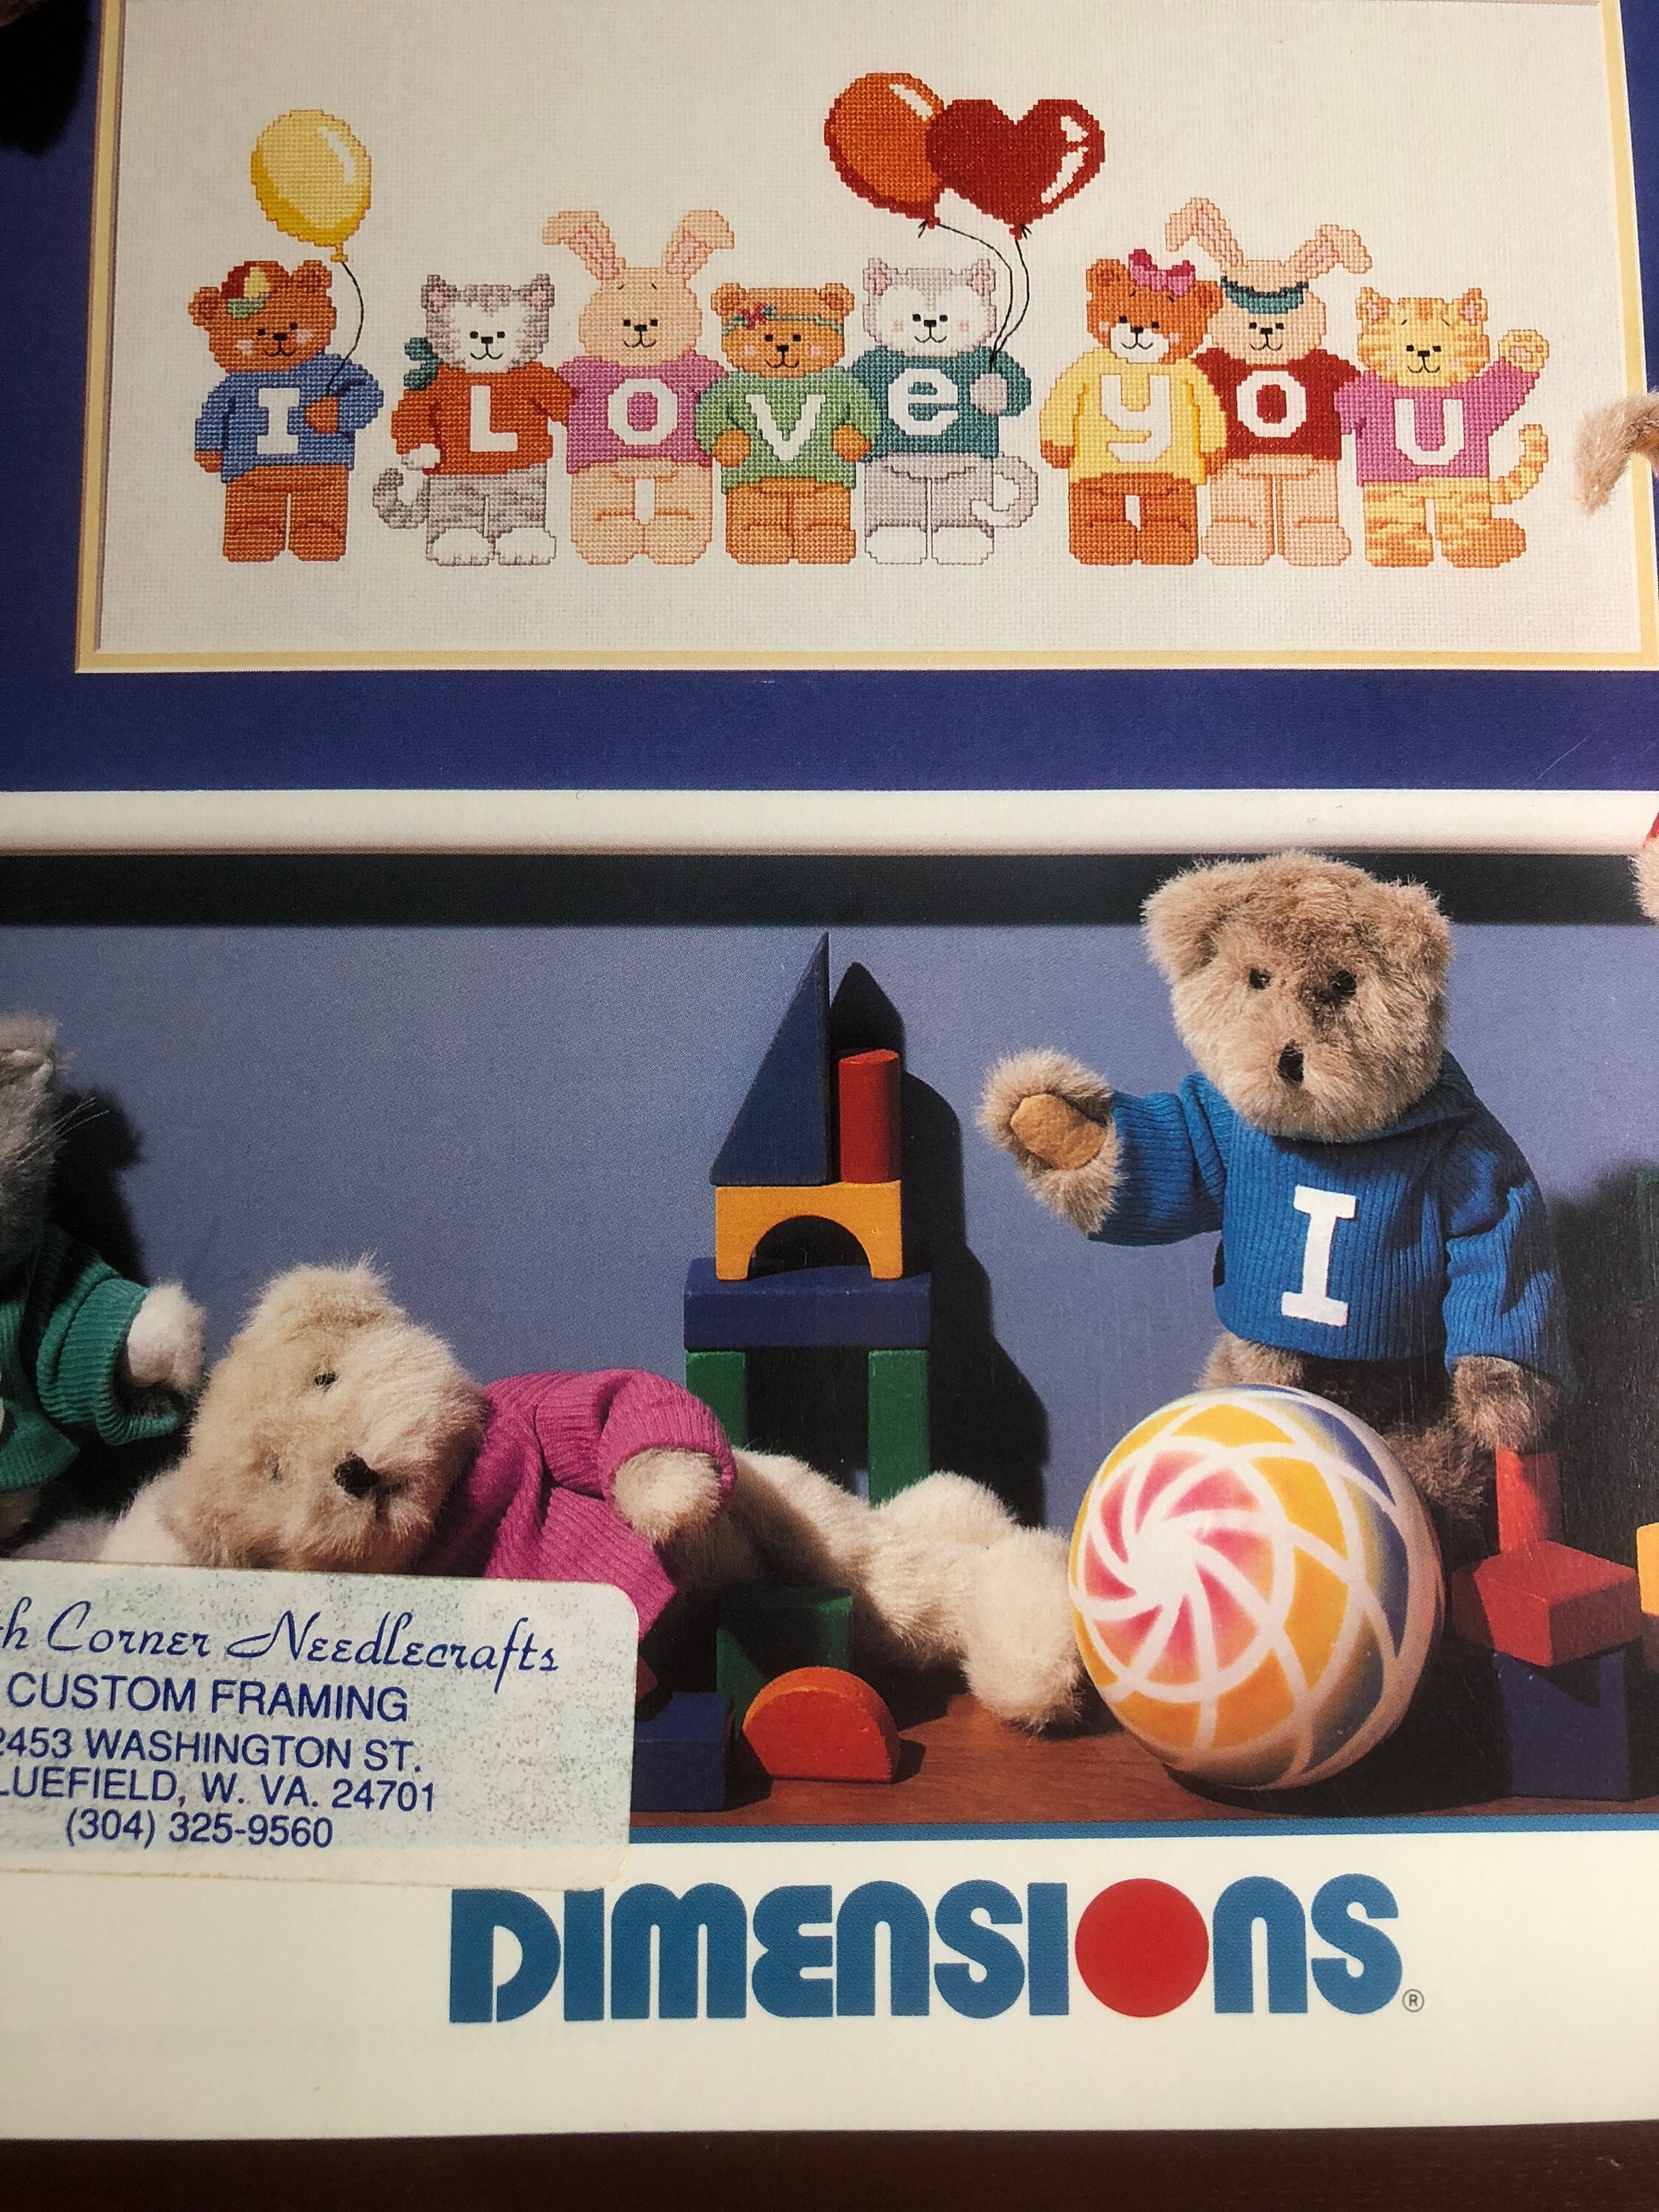 Dimensions, Loving Friends, Chris Davenport, #183, Vintage 1990, Counted Cross Stitch, Pattern Book